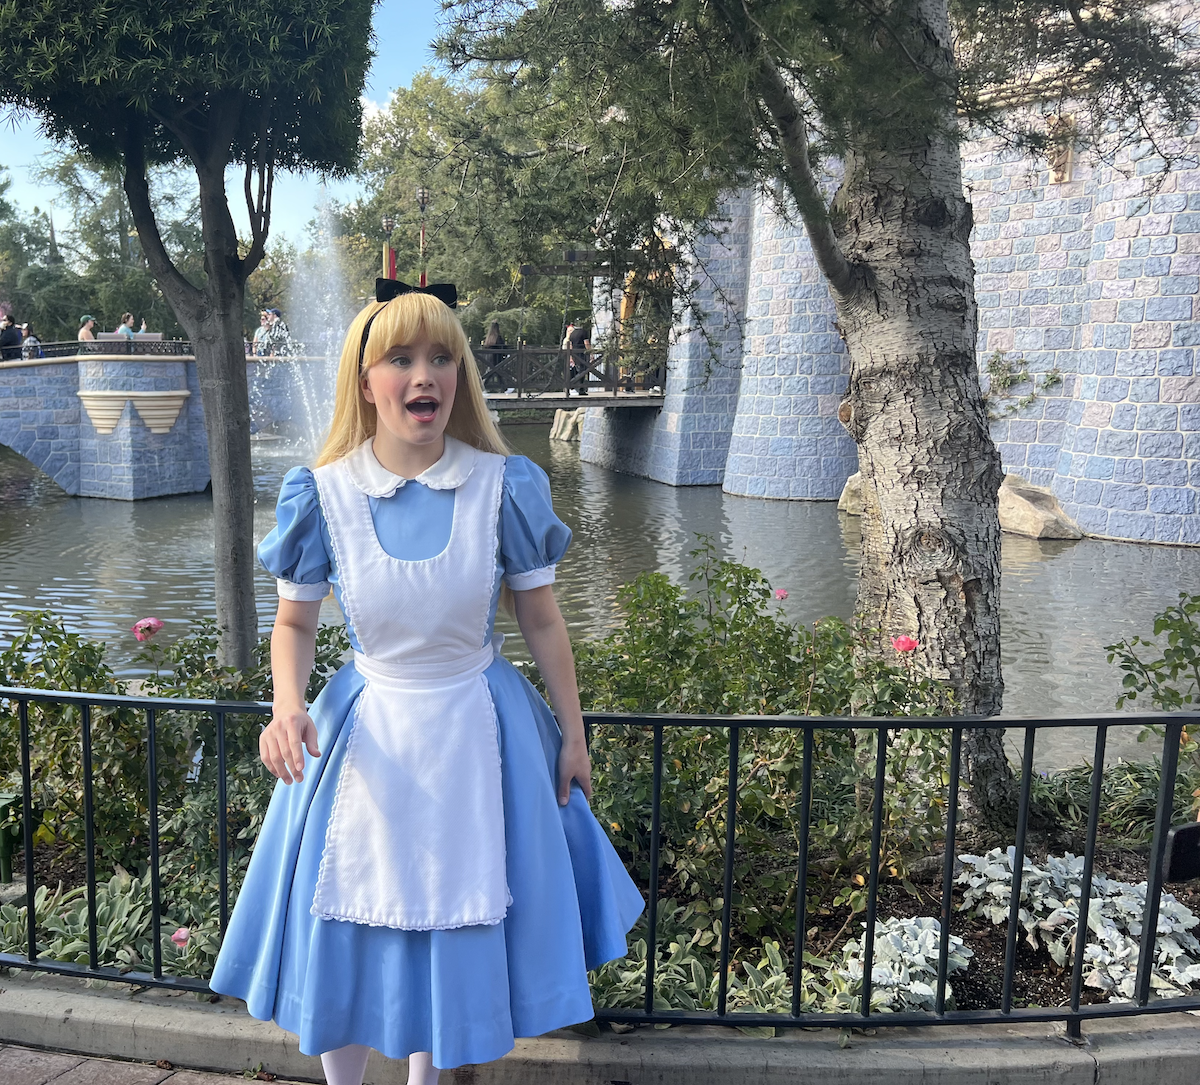 Alice at Disneyland by castle